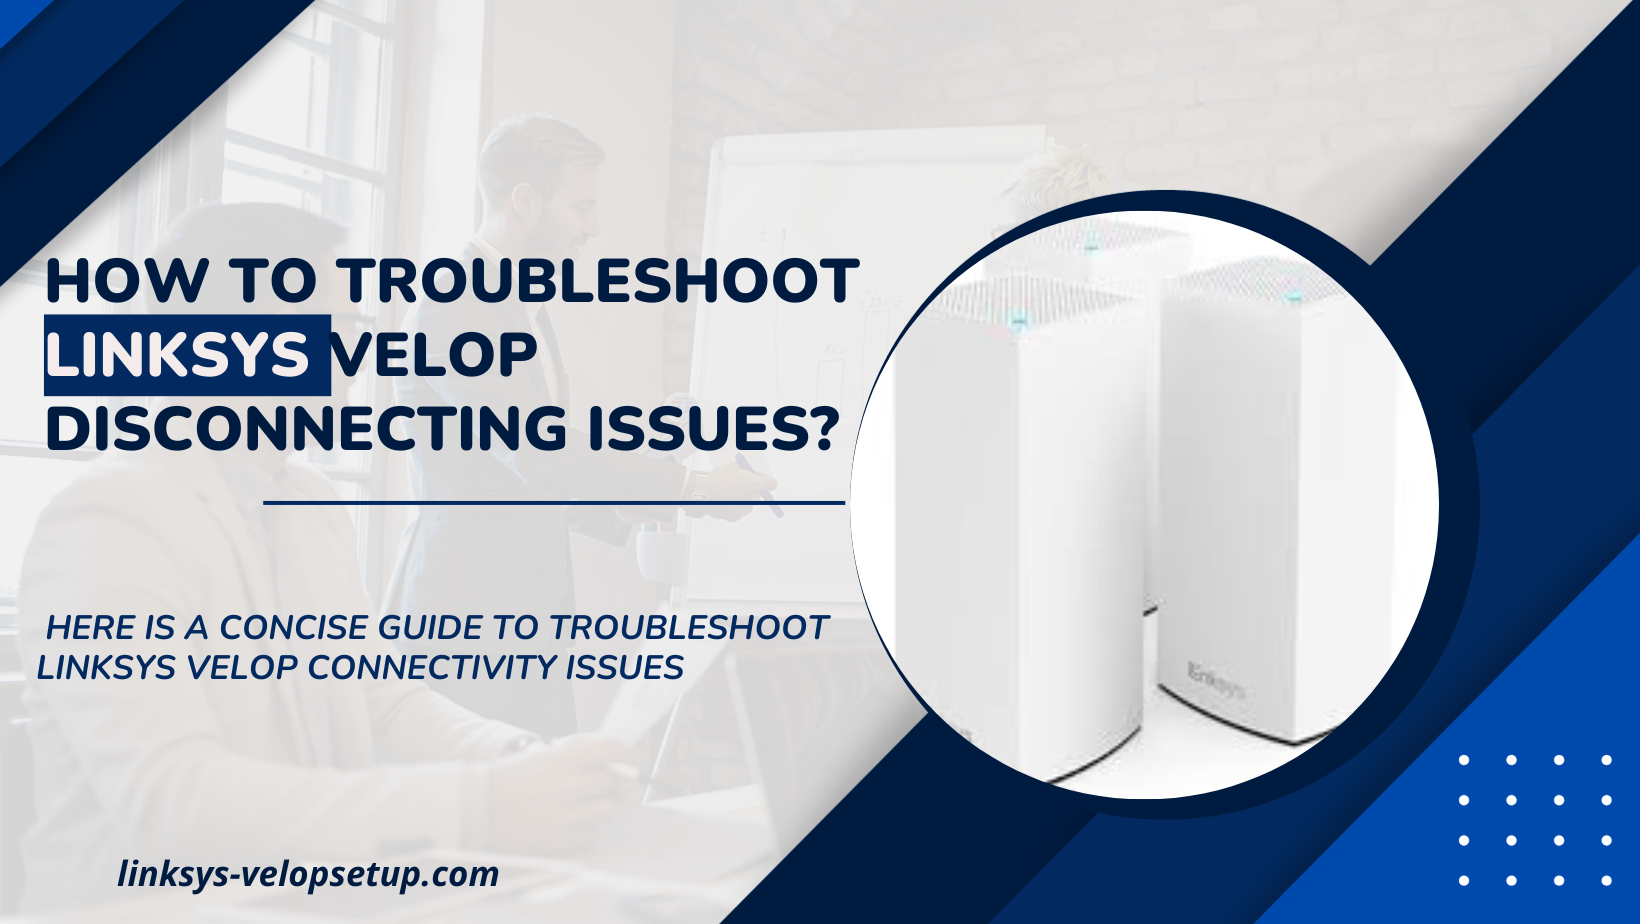 You are currently viewing How to Troubleshoot Linksys Velop Disconnecting Issues?